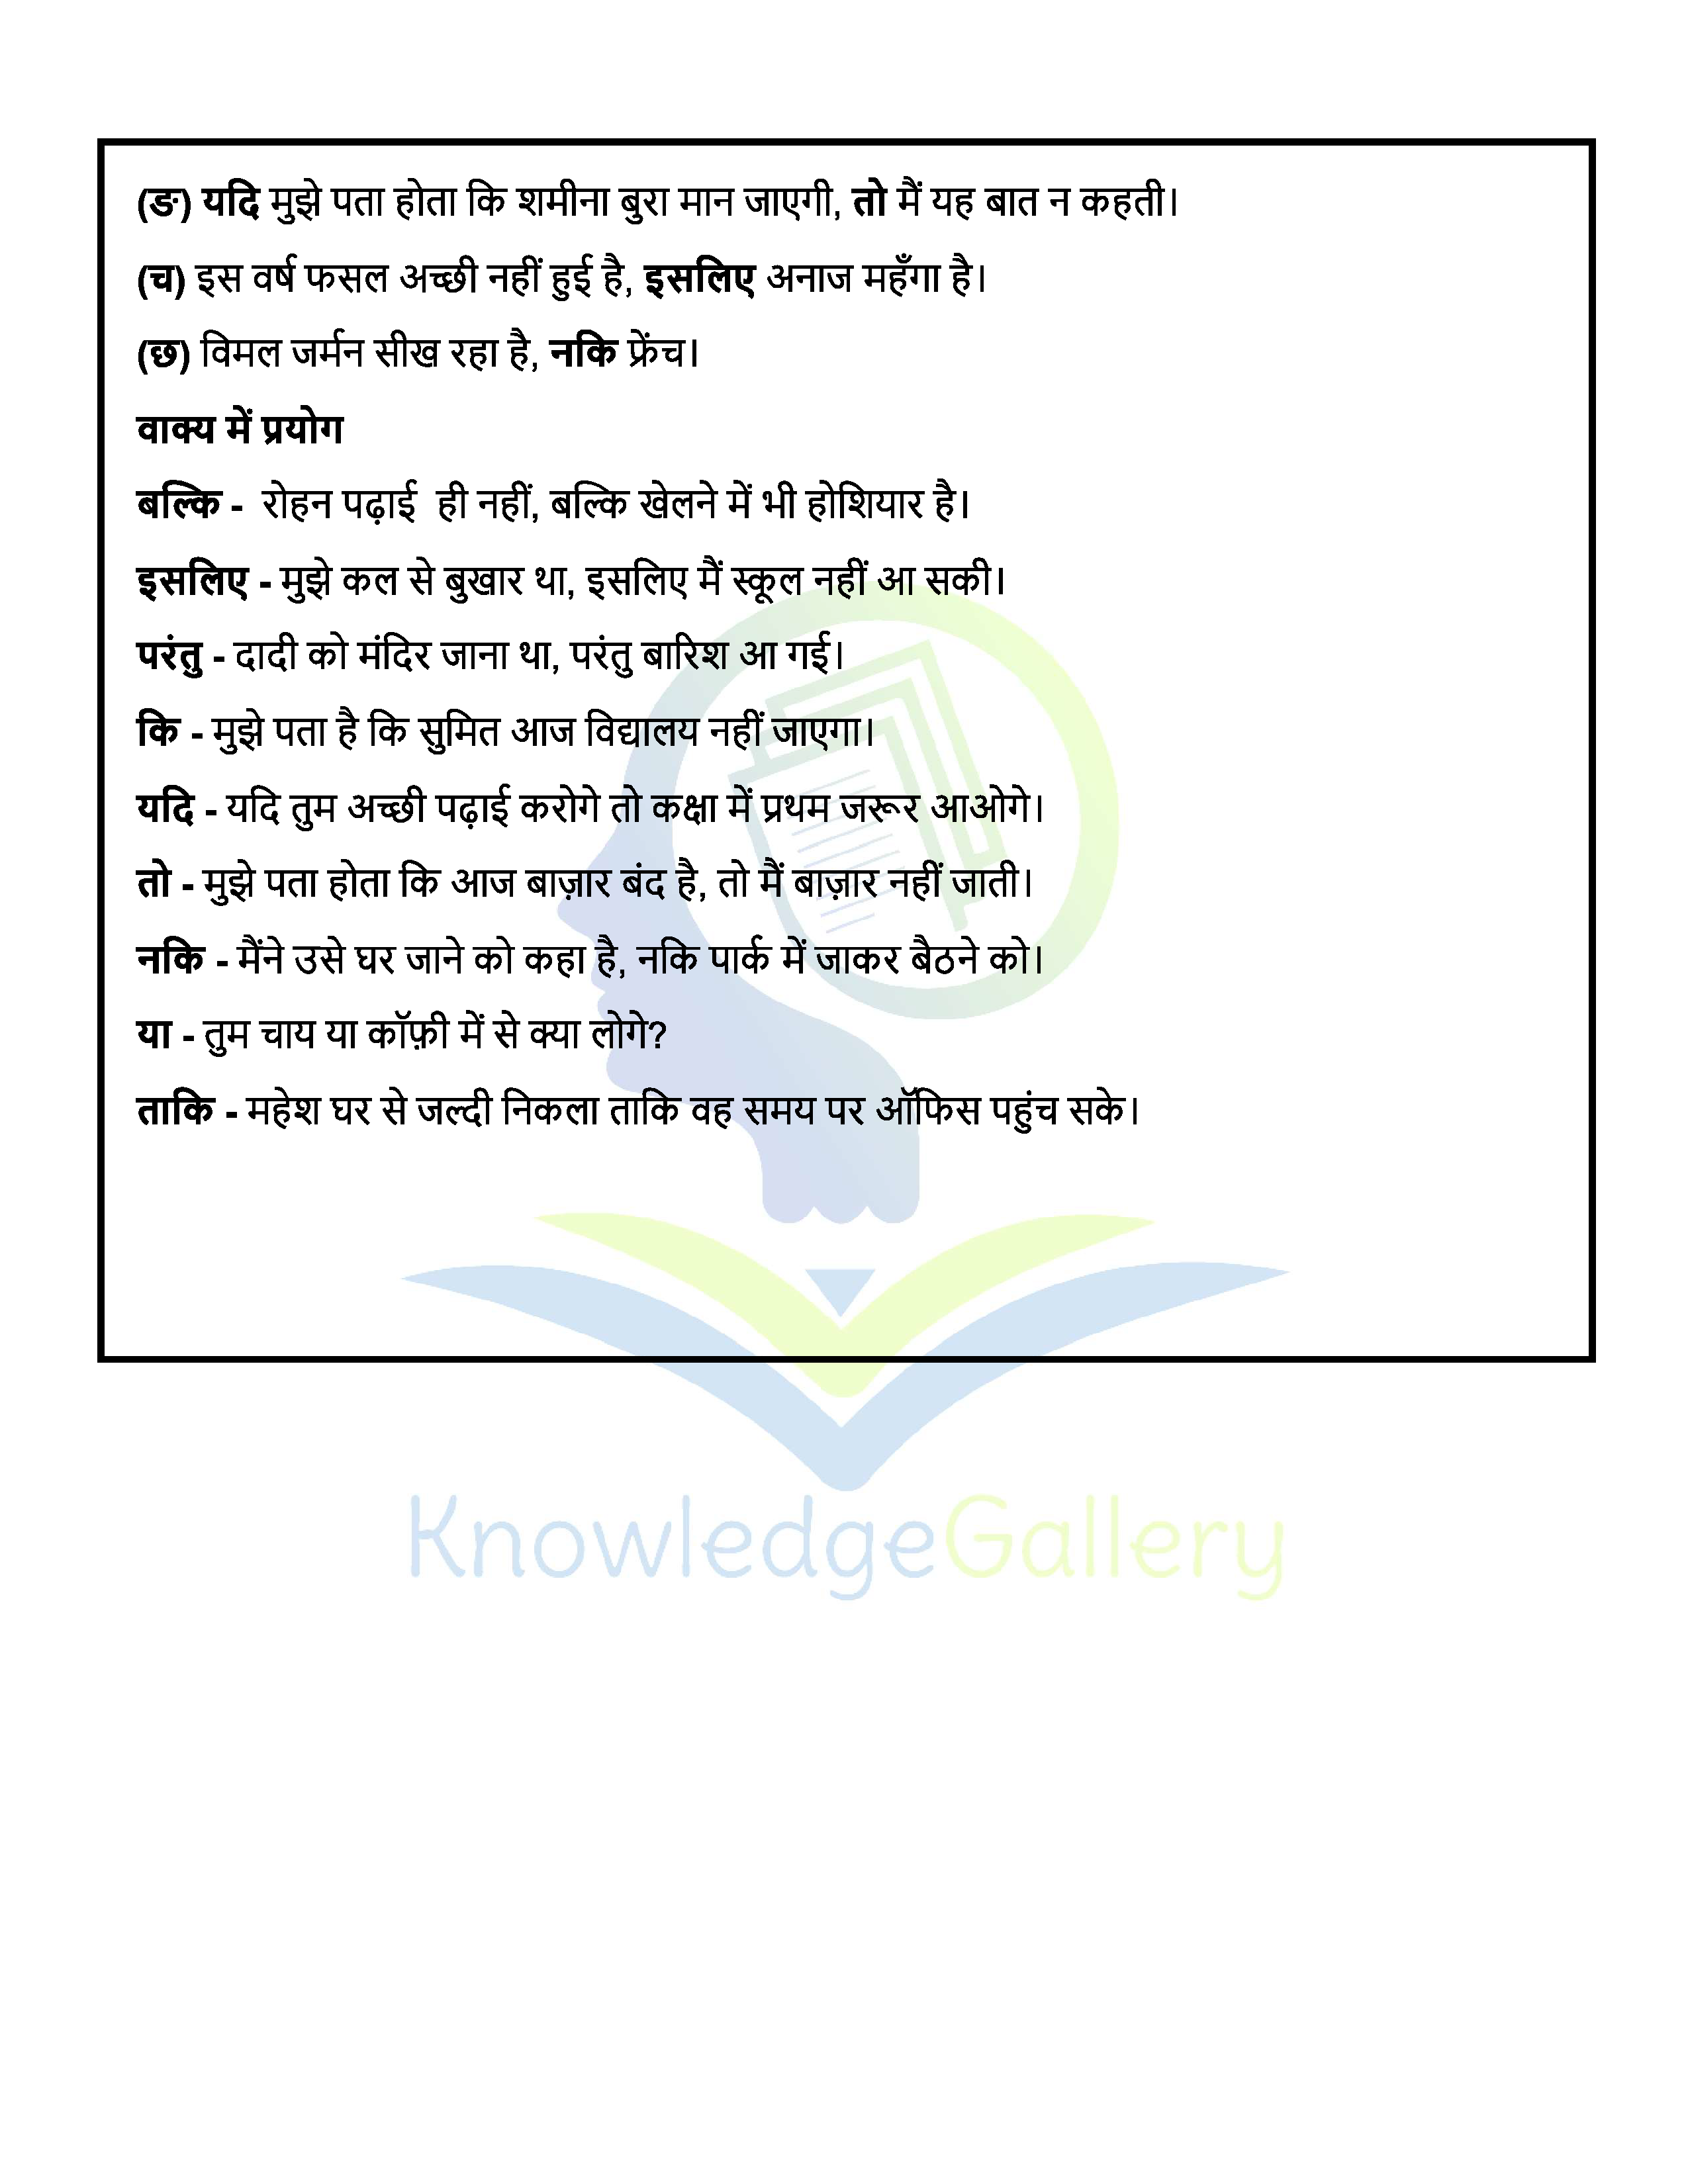 NCERT Solution For Class 6 Hindi Chapter 12 part 5